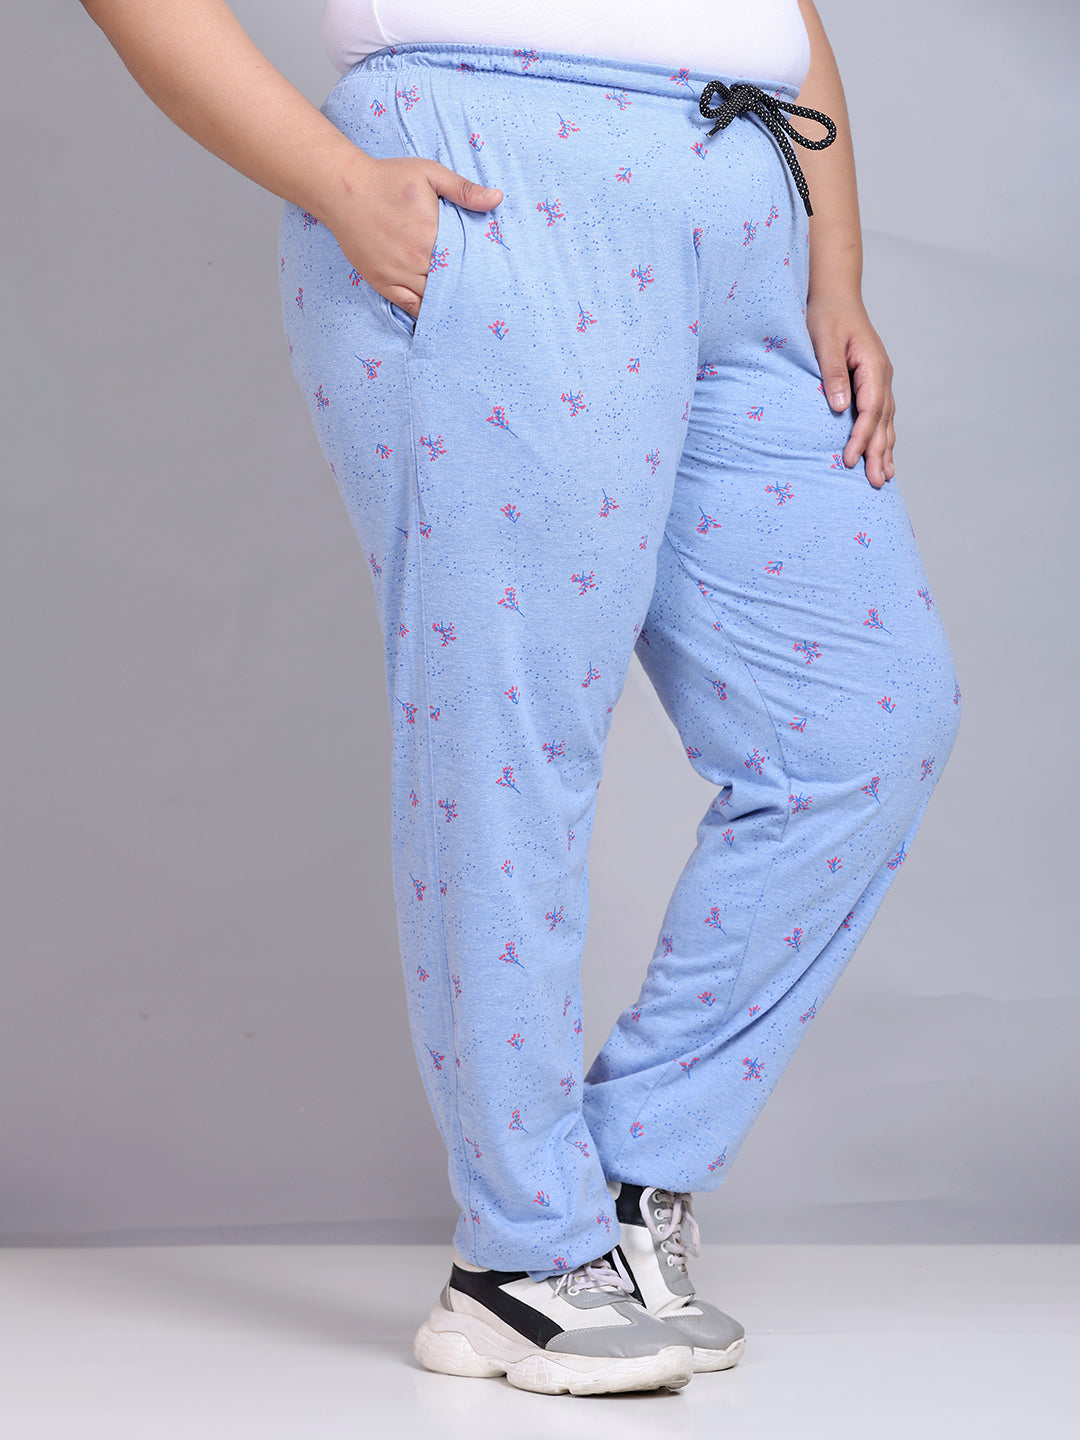 Cotton Printed Night Pants For Women - Blue